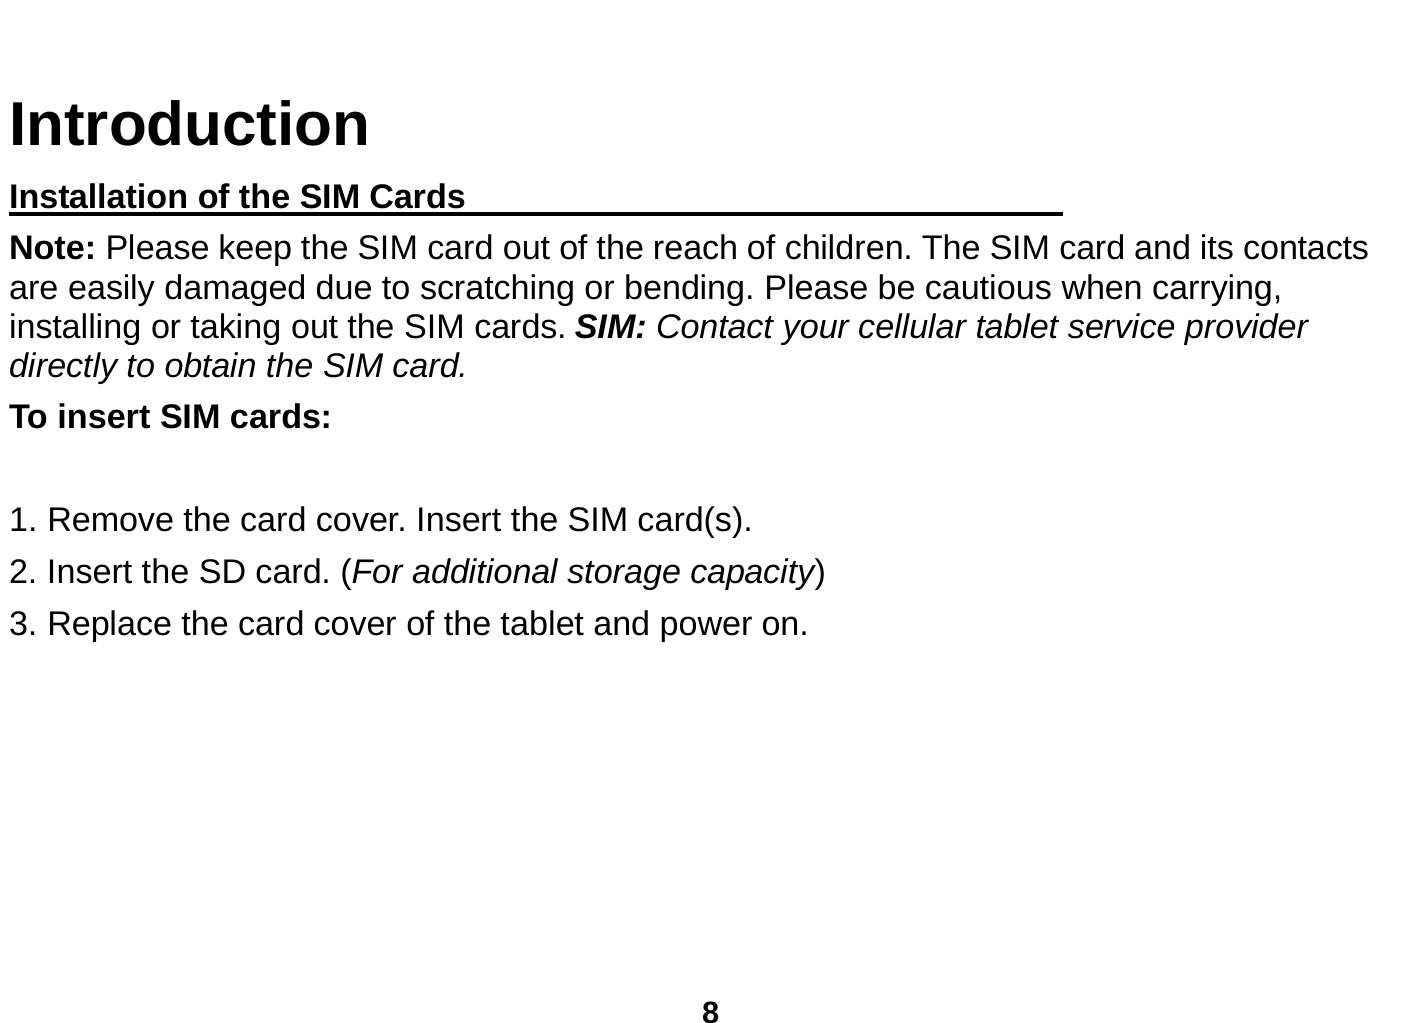  8  Introduction Installation of the SIM Cards                                    Note: Please keep the SIM card out of the reach of children. The SIM card and its contacts are easily damaged due to scratching or bending. Please be cautious when carrying, installing or taking out the SIM cards. SIM: Contact your cellular tablet service provider directly to obtain the SIM card. To insert SIM cards:  1. Remove the card cover. Insert the SIM card(s).   2. Insert the SD card. (For additional storage capacity) 3. Replace the card cover of the tablet and power on.          